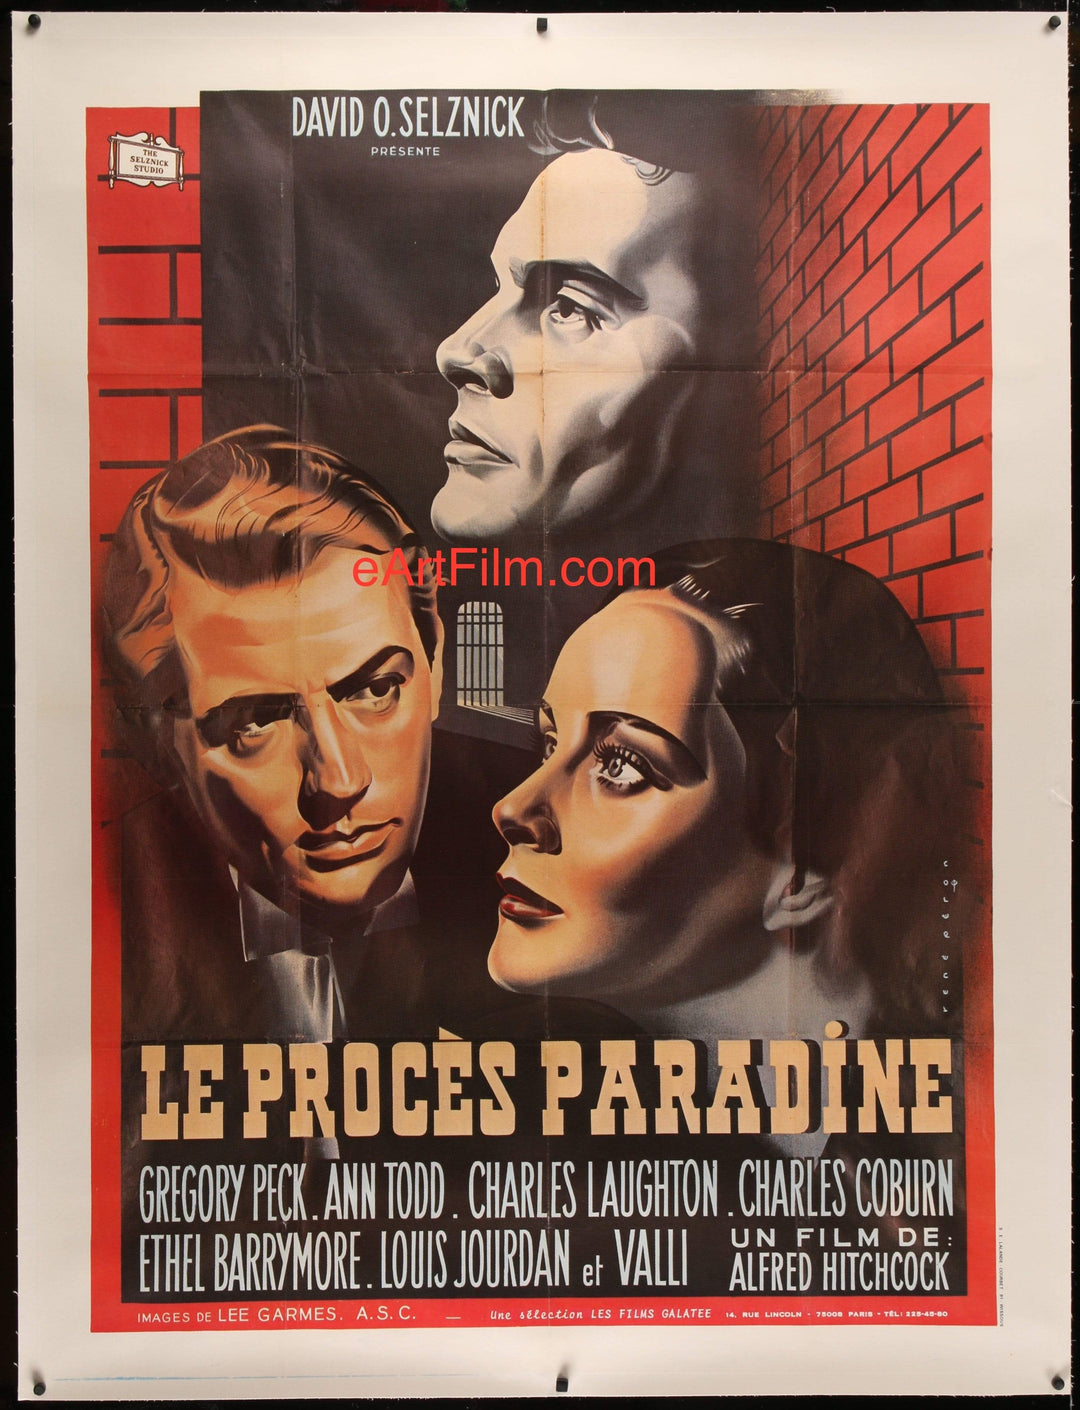 eArtFilm.com French 1 Panel (47.5"x63") Paradine Case Alfred Hitchock linen R1970's 47"x63" Gregory Peck film noir